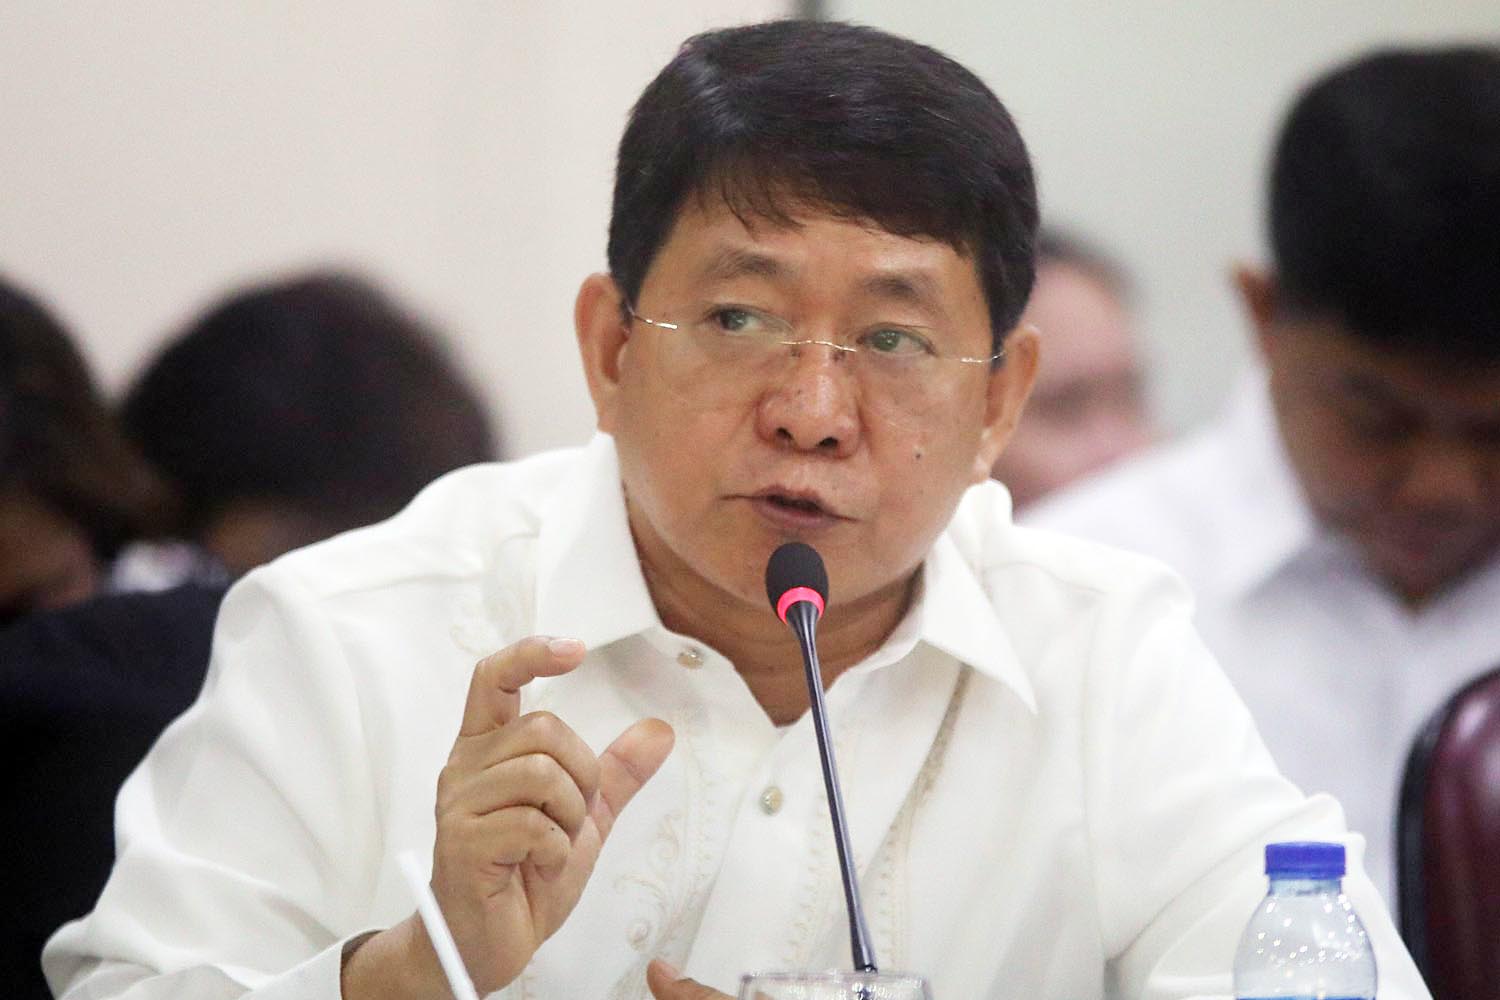 DILG CHIEF. Interior Secretary Eduardo Año says local government units may impose strict lockdowns on towns and barangays with the approval of the regional task force on coronavirus. File photo by Darren Langit/Rappler  